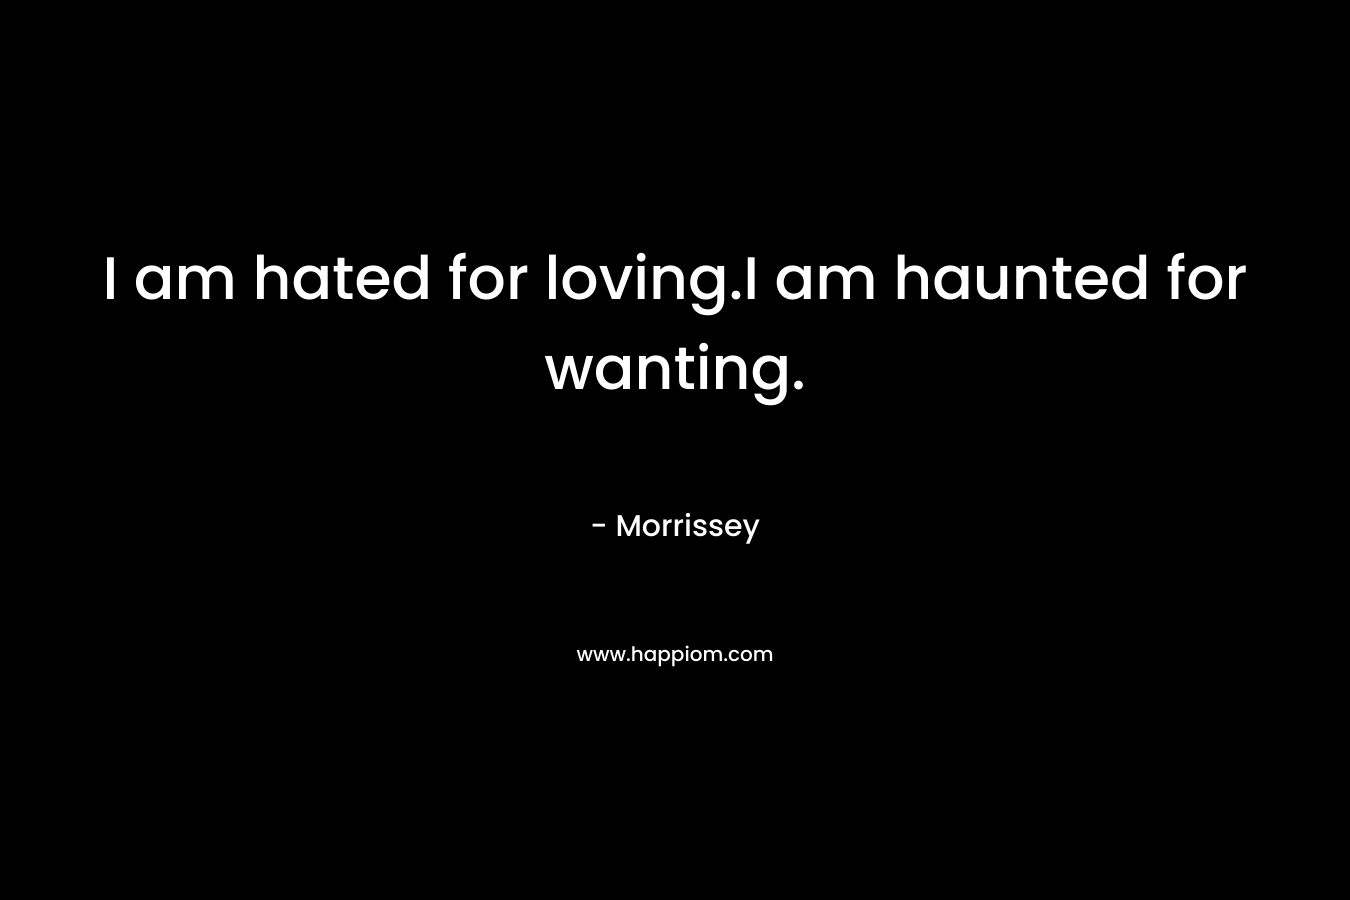 I am hated for loving.I am haunted for wanting.